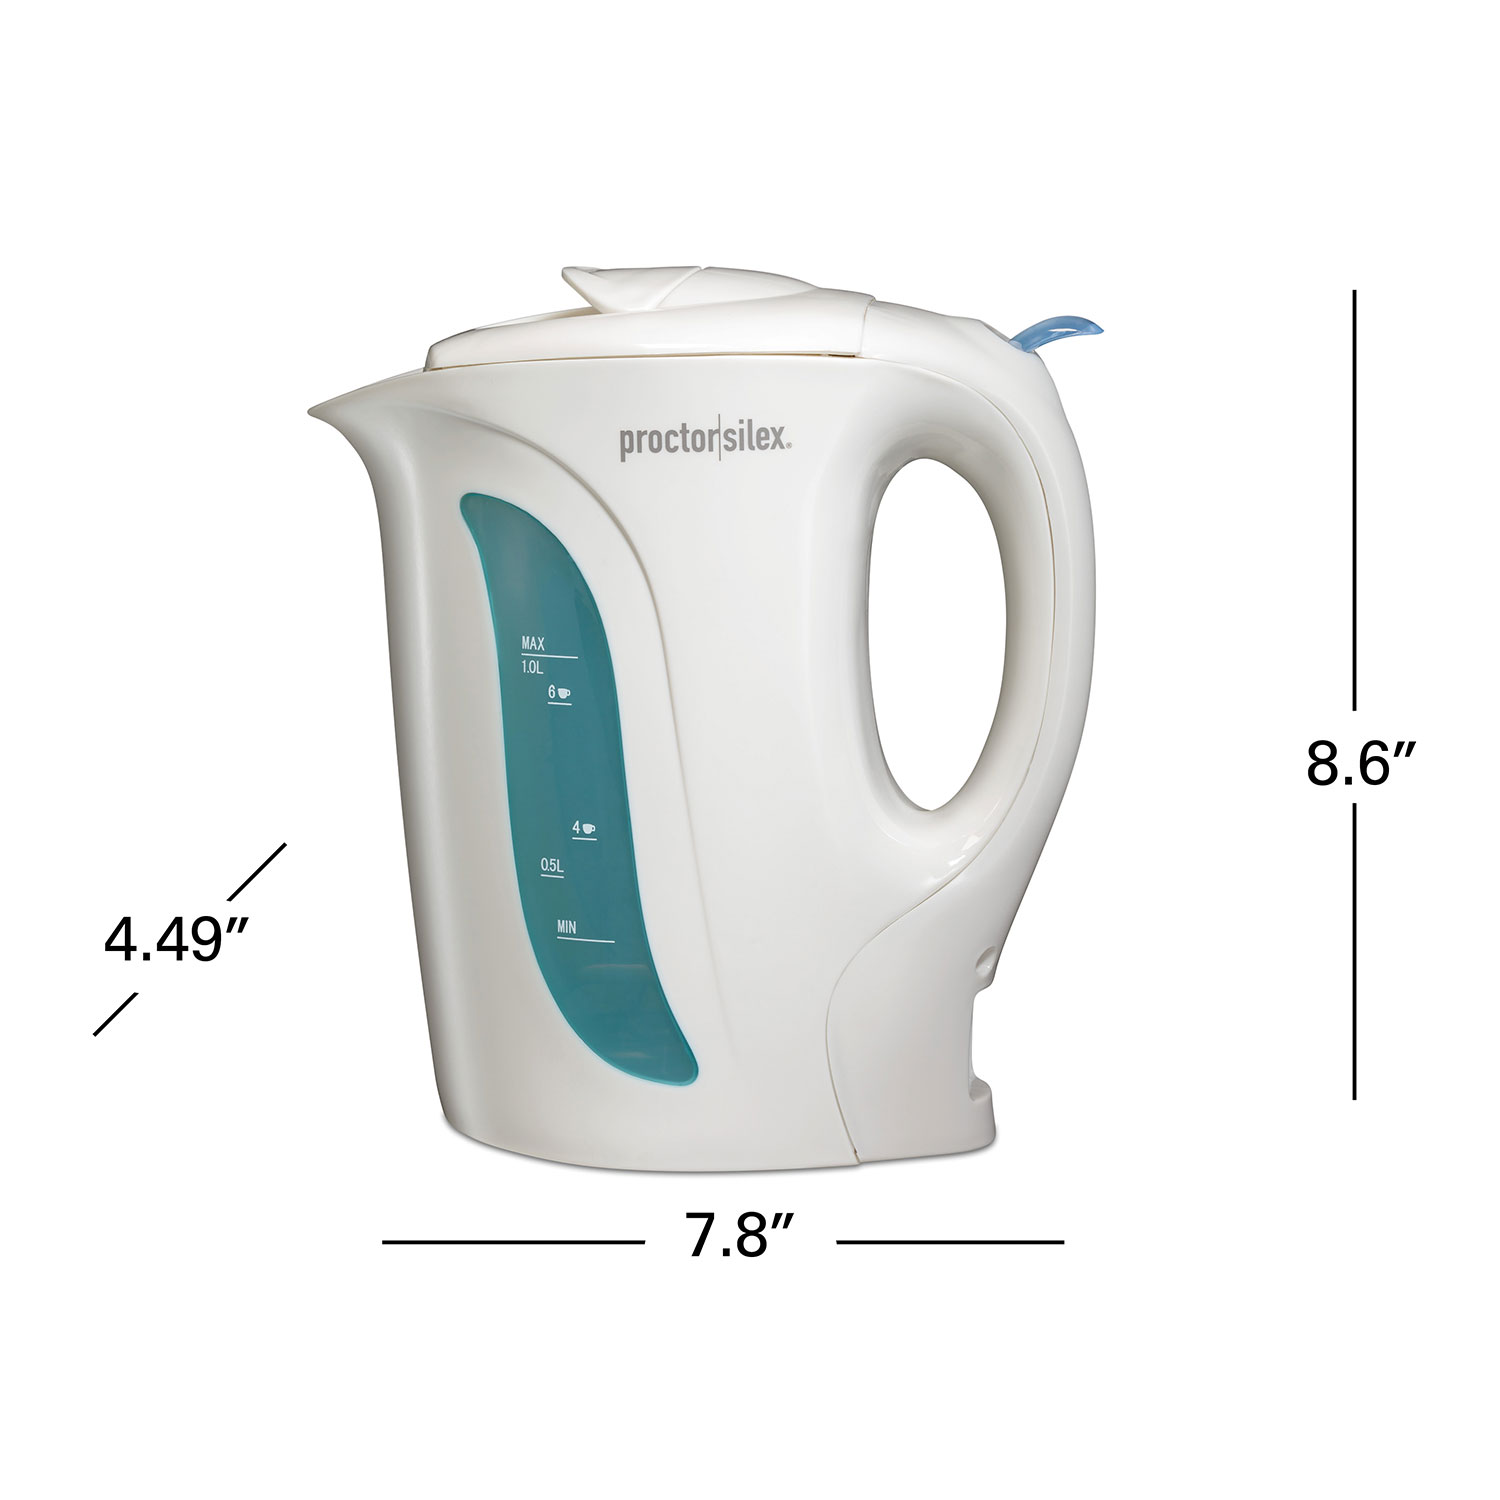 The right way to use an electric water kettle